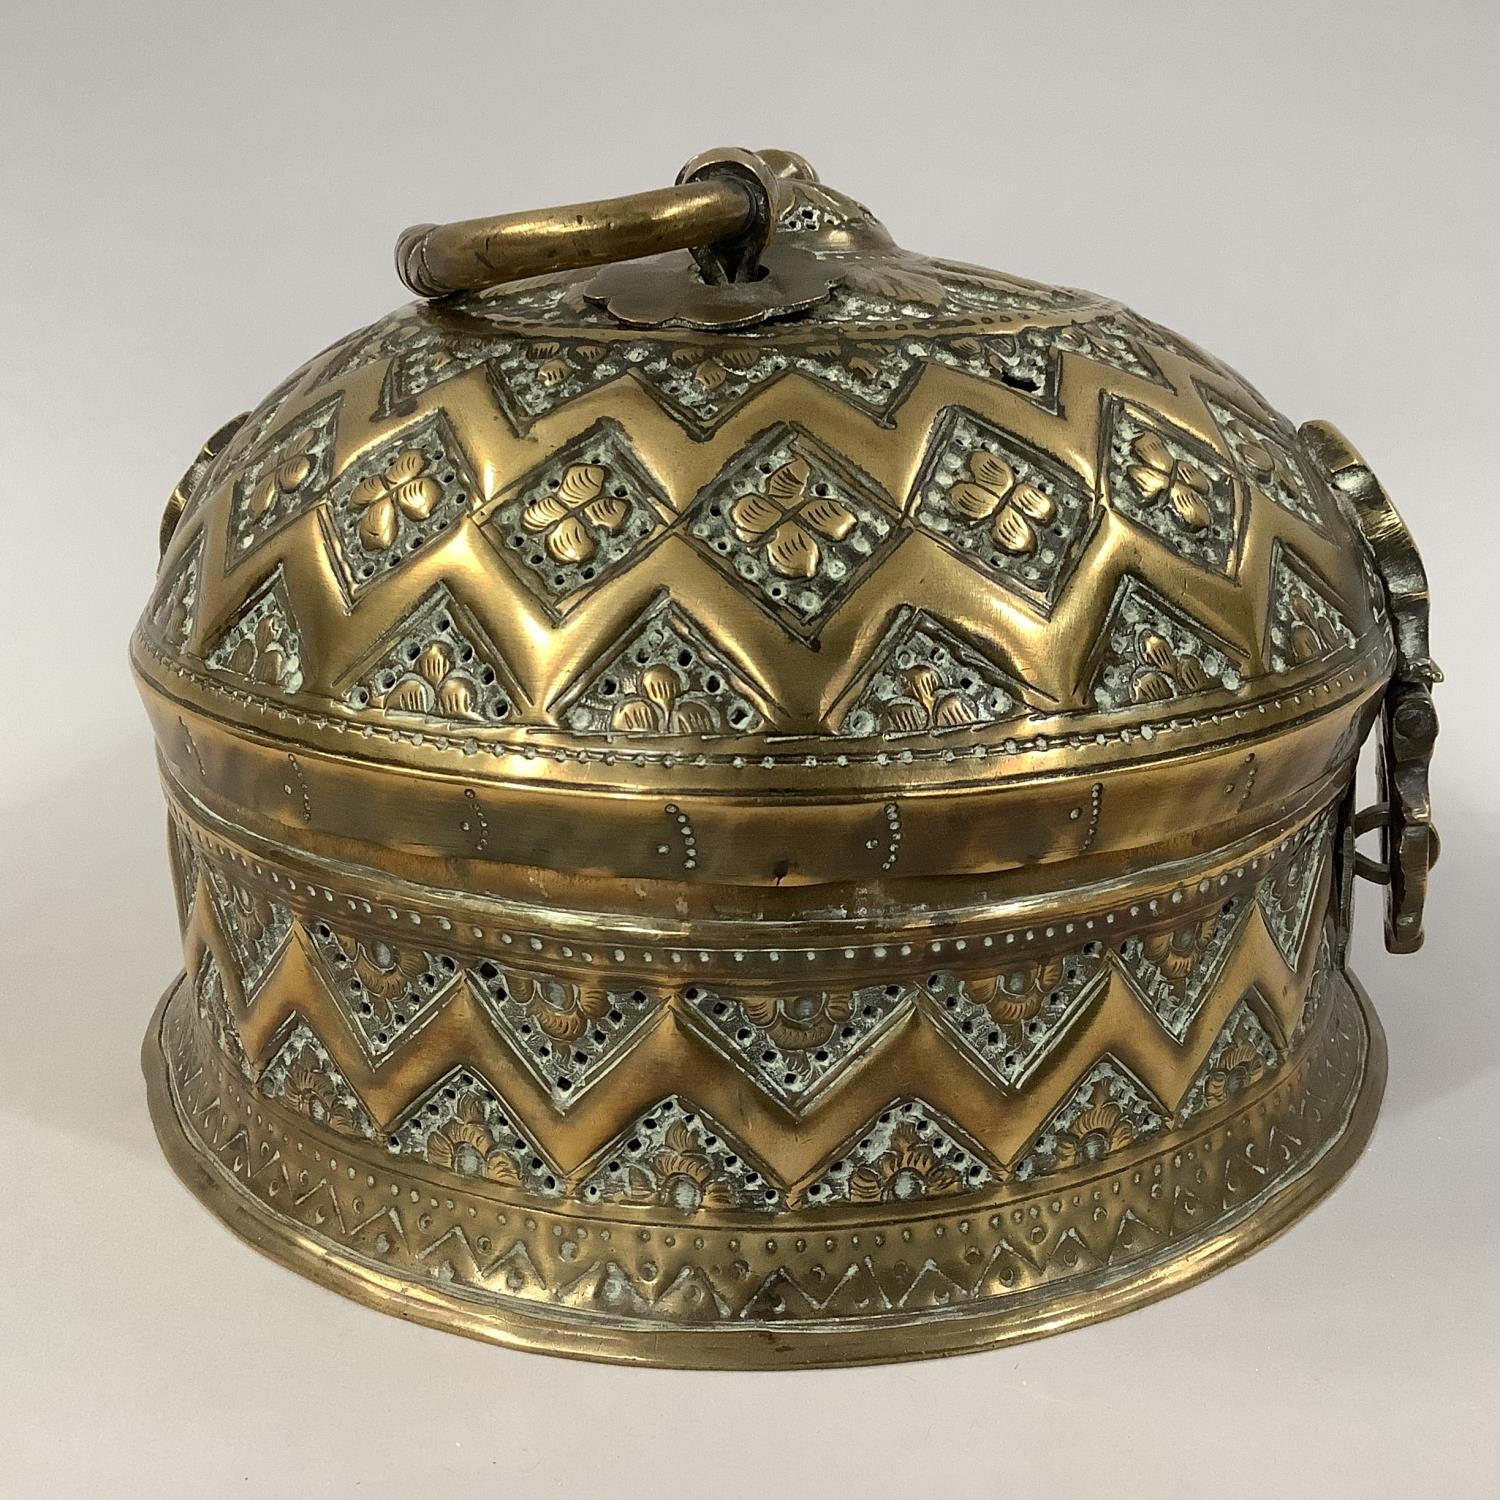 A LATE 19TH CENTURY INDIAN BRASS BETEL NUT PANDAN BOX, circular with domed cover and twisted - Image 3 of 4